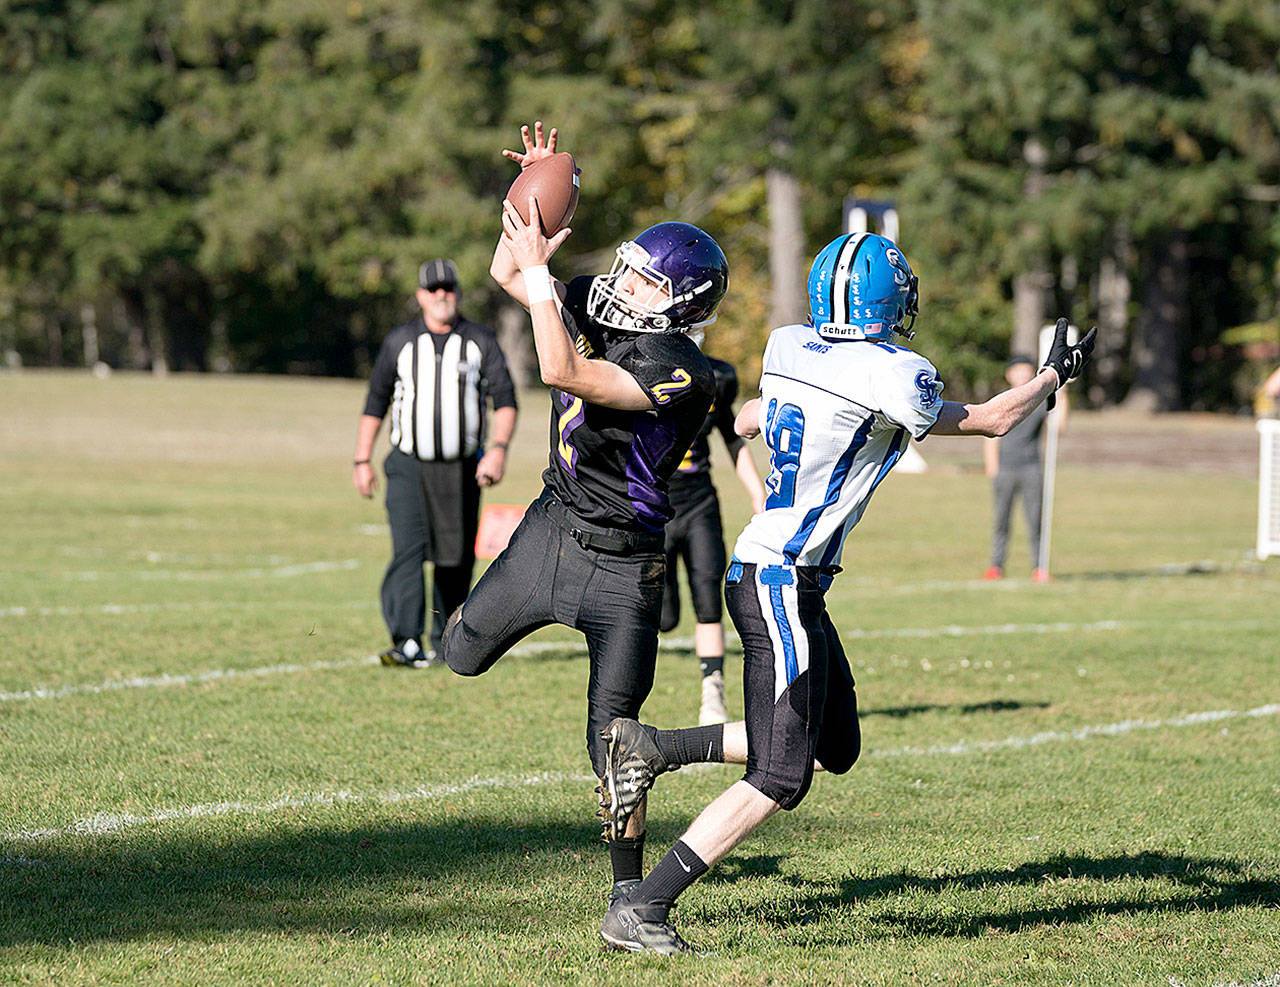 Quilcene’s Bishop Budnek (2) intercepts in a pass intended for Seattle Lutheran’s Hayden Bushfield onSaturday in Quilcene. Budnek ran the ball back 33 yards to set up a touchdown. (Steve Mullensky/for Peninsula Daily News)